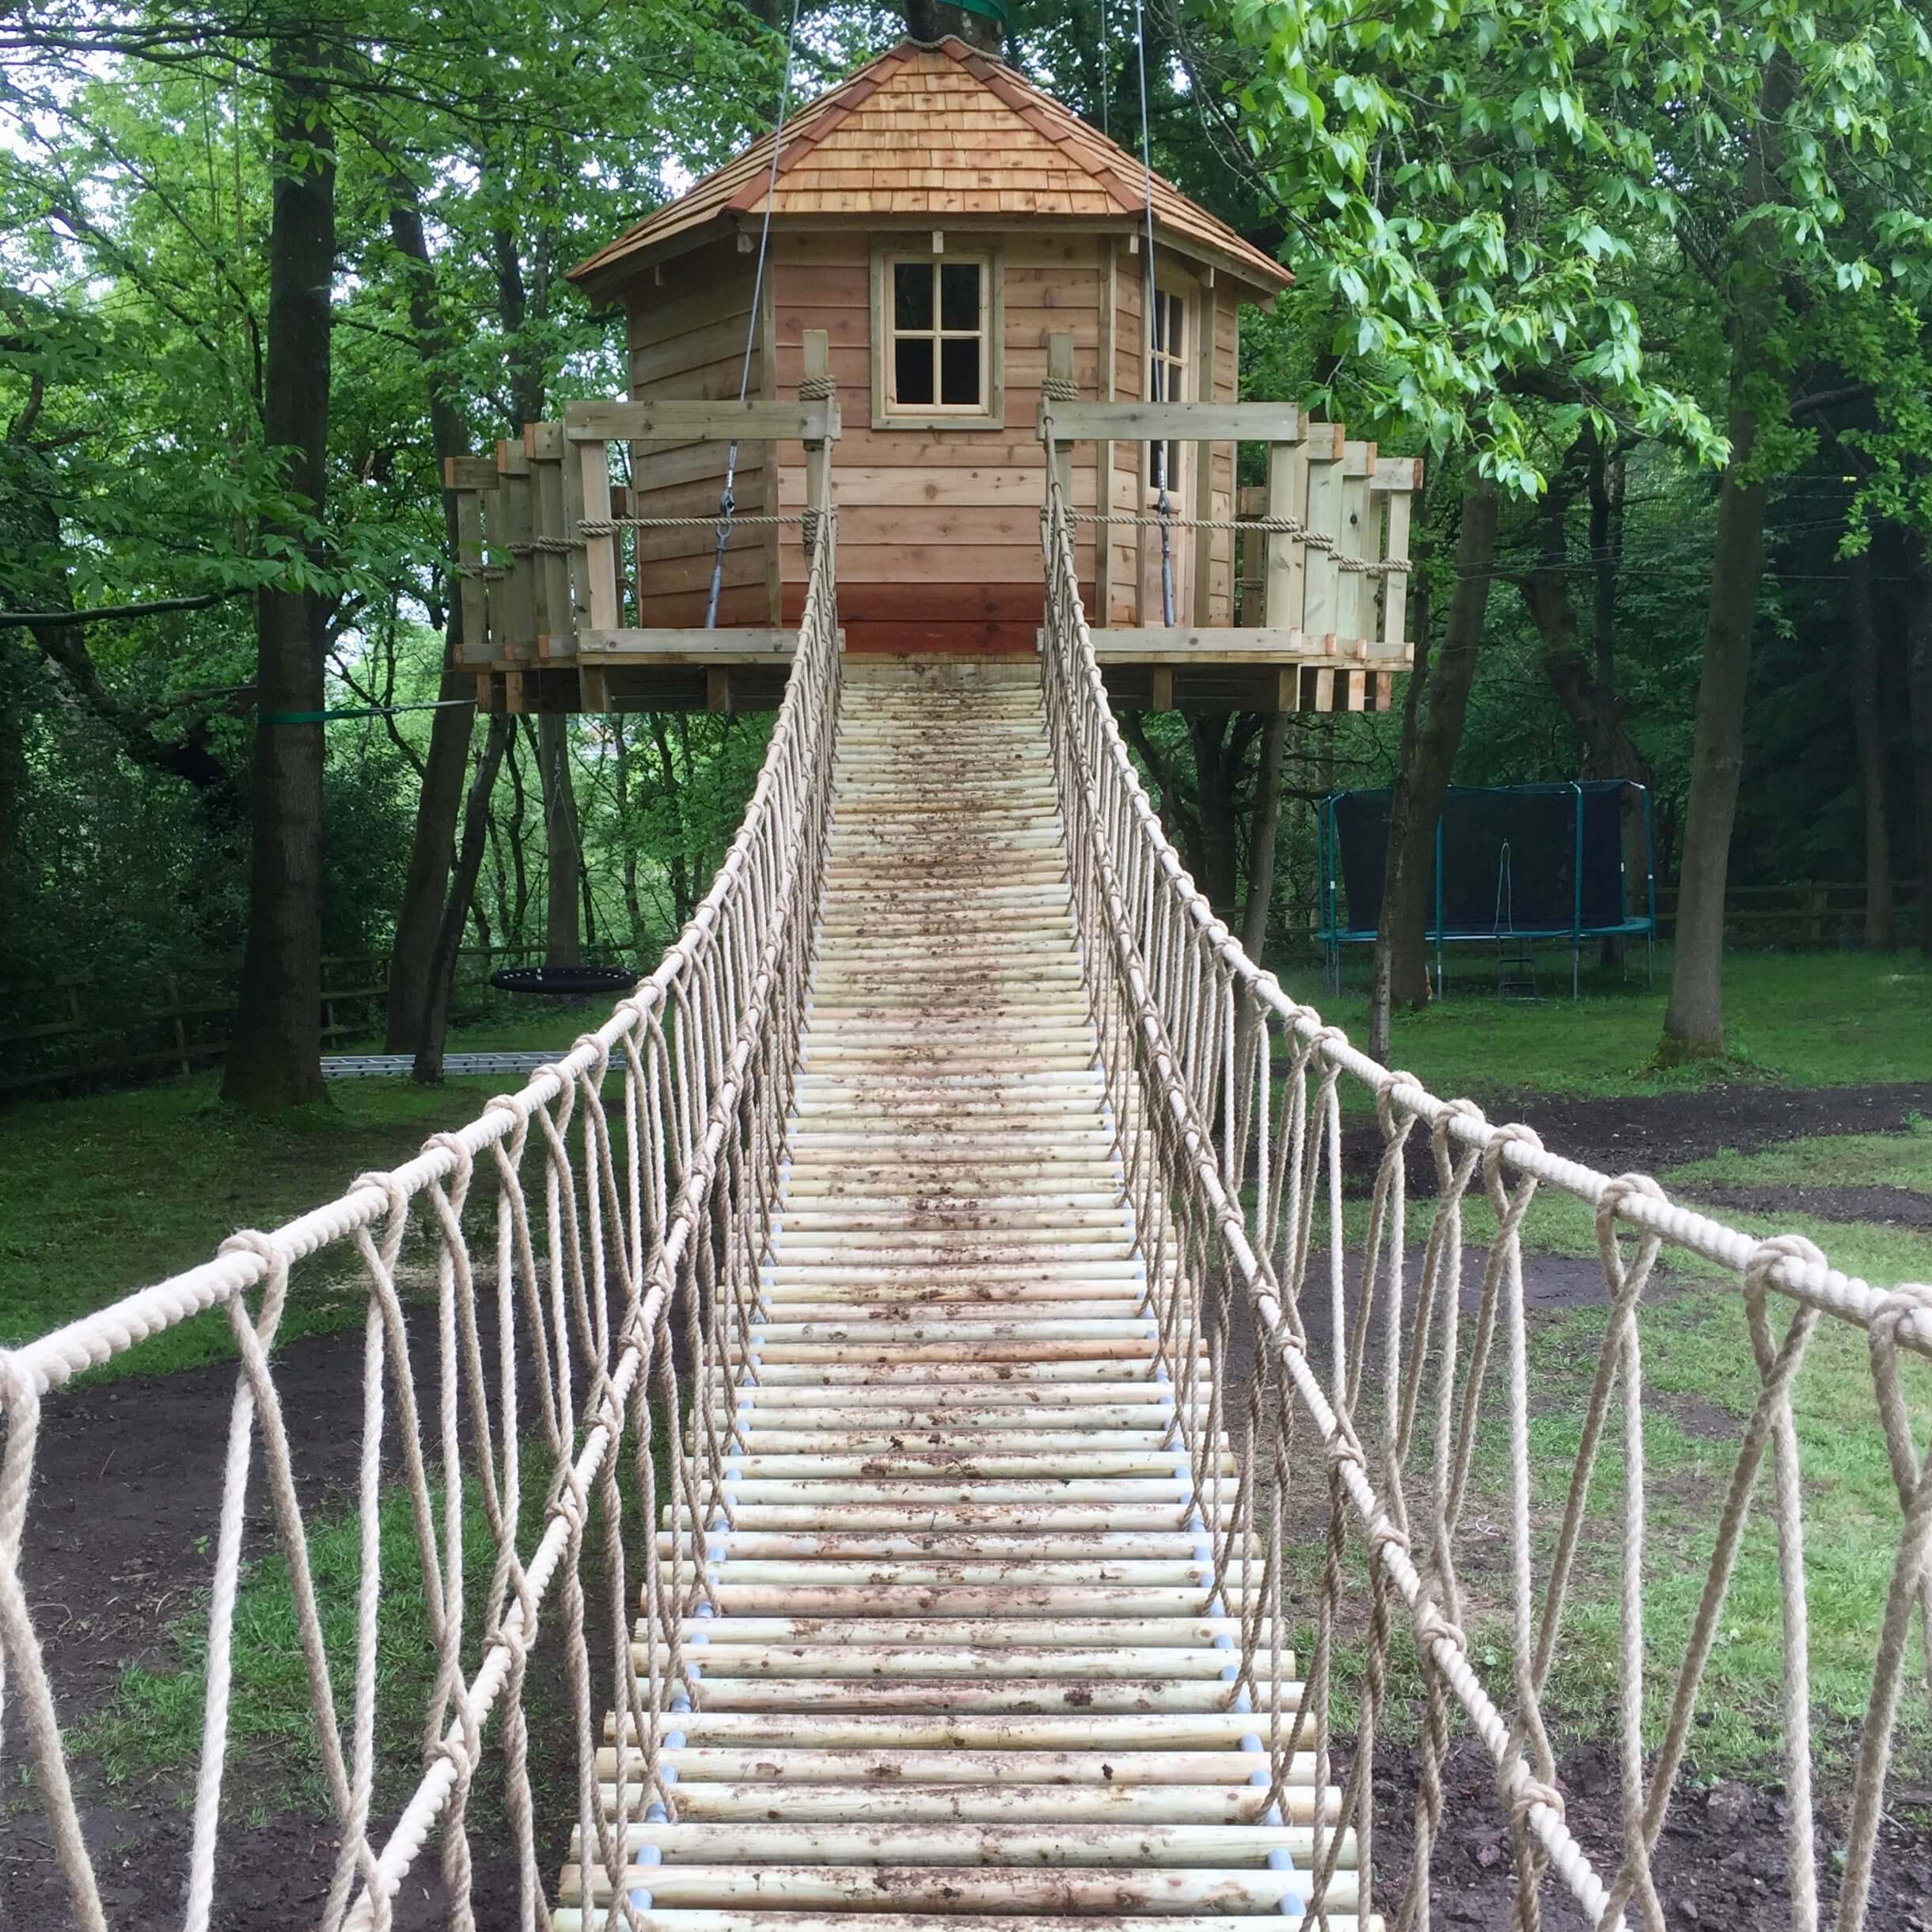 Rope Bridge types - Suspended, Fixed-Beam or Log Rounds, level-to